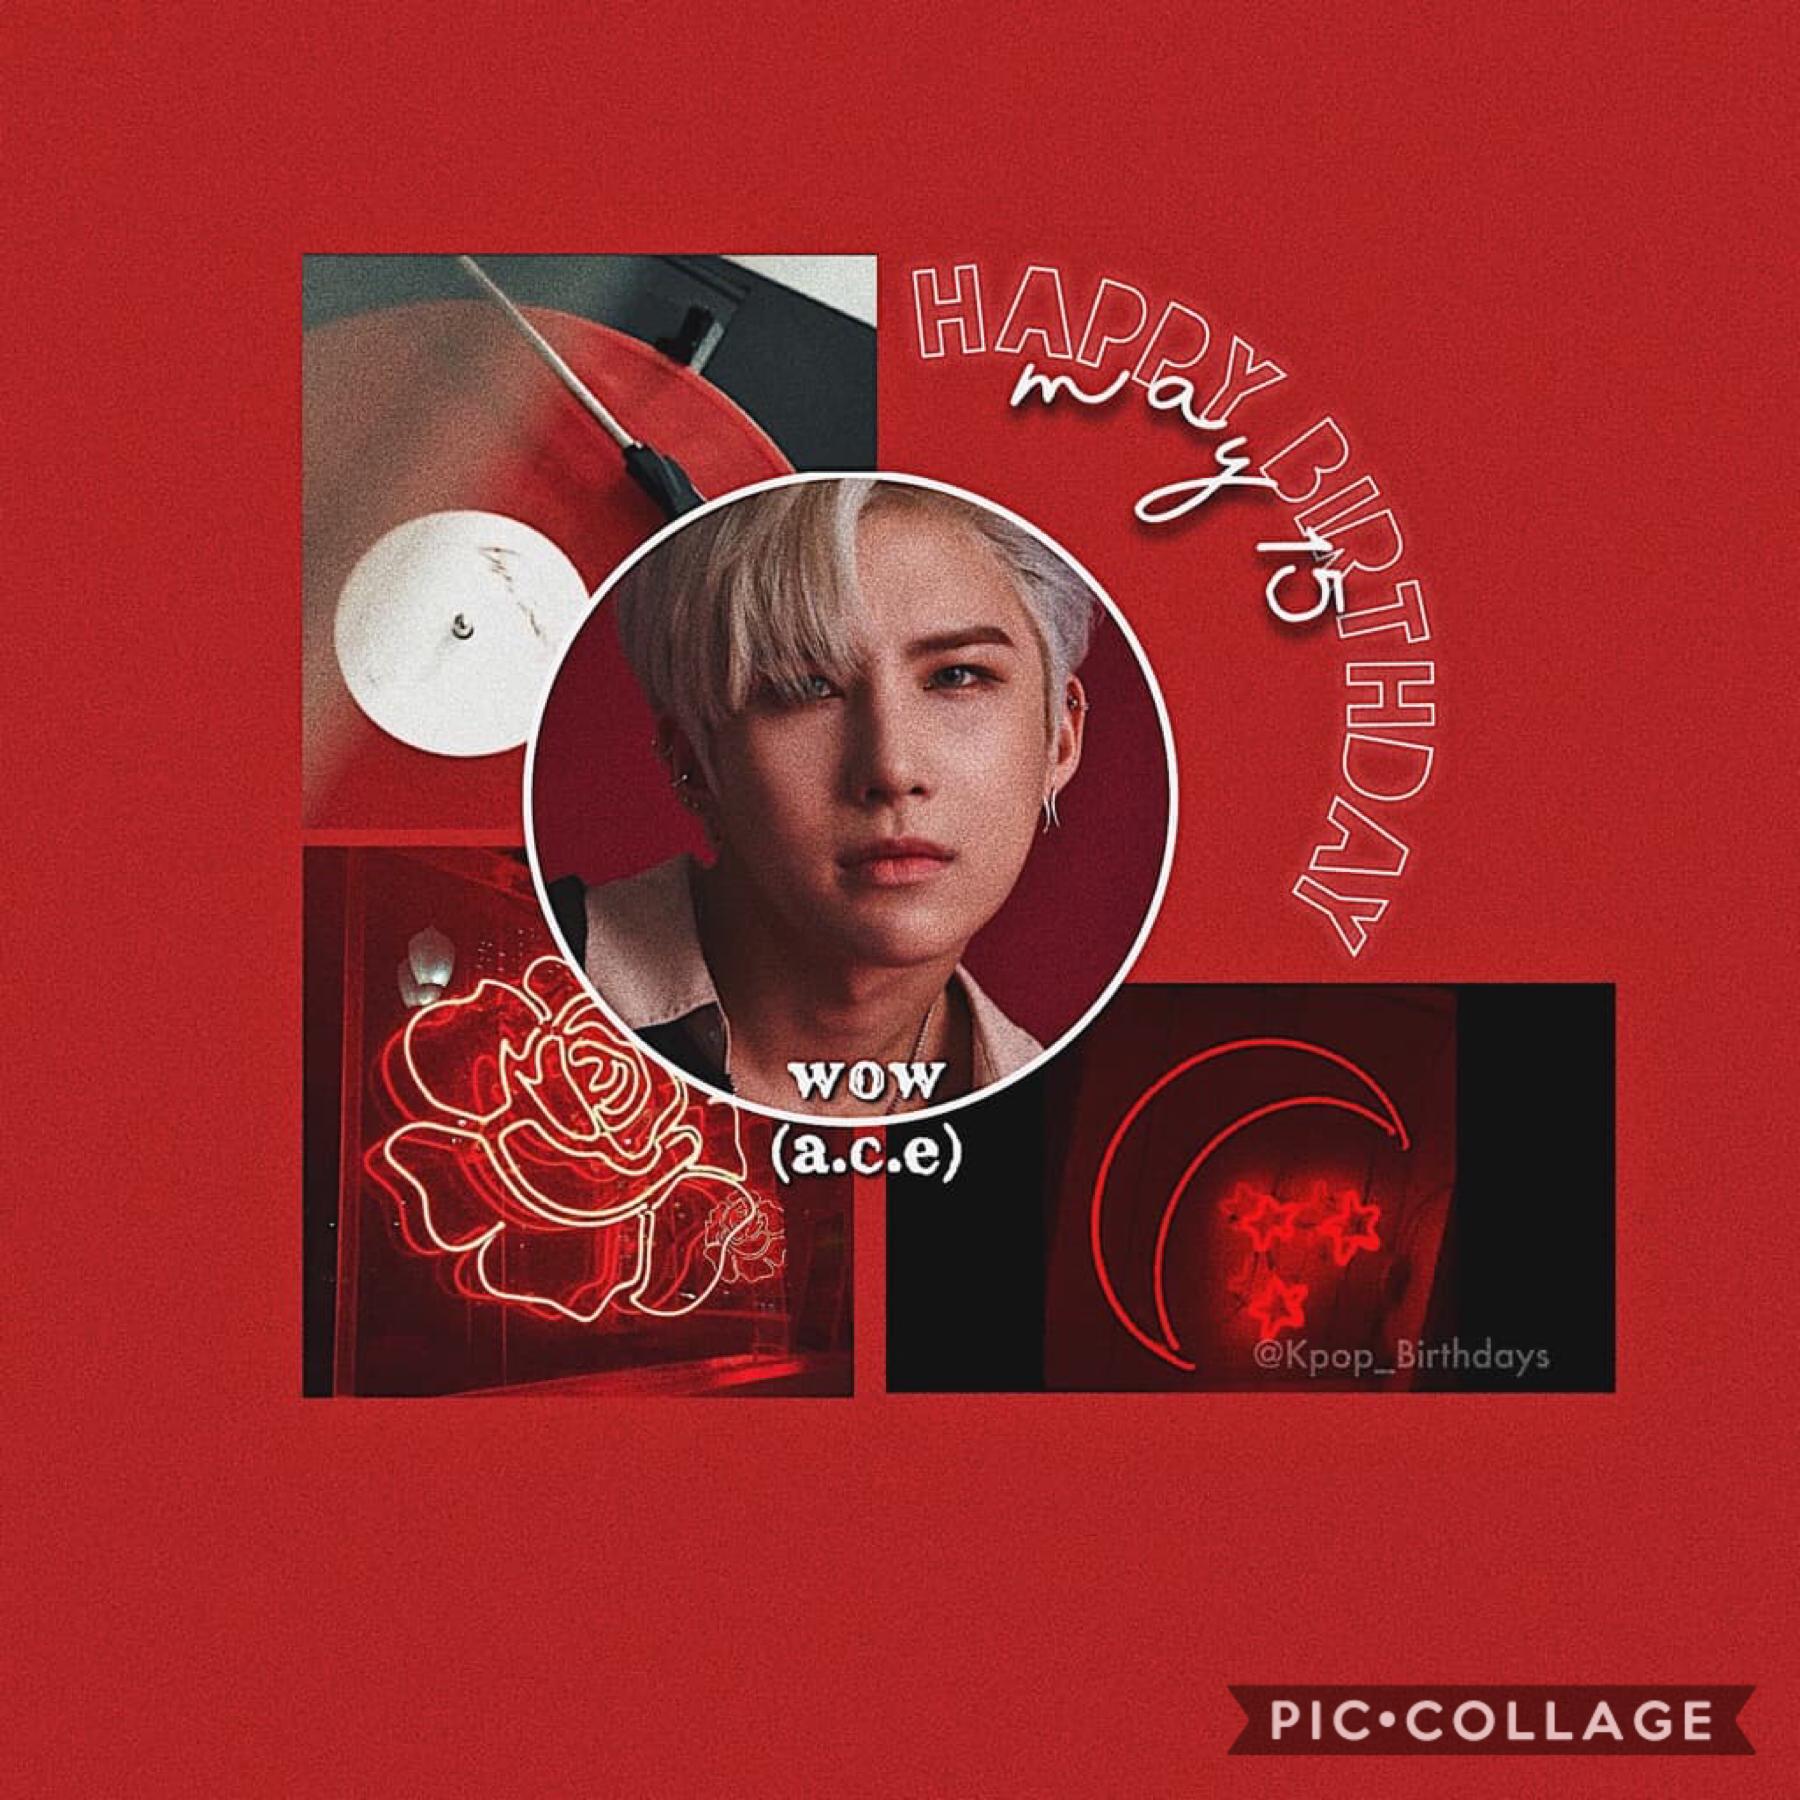 •🌷🌹•
happy birthday!! yes his name really is wow. go stan a.c.e, they’re very talented and underrated. so show them support!! 🥳🥳
Other birthdays:
•Girls Generation’s Sunny~May 15
•IU~May 16
•BIGBANG’s Taeyang~May 18
EVERGLOW’s Onda~ May 18
•EVERGLOW’s E:U